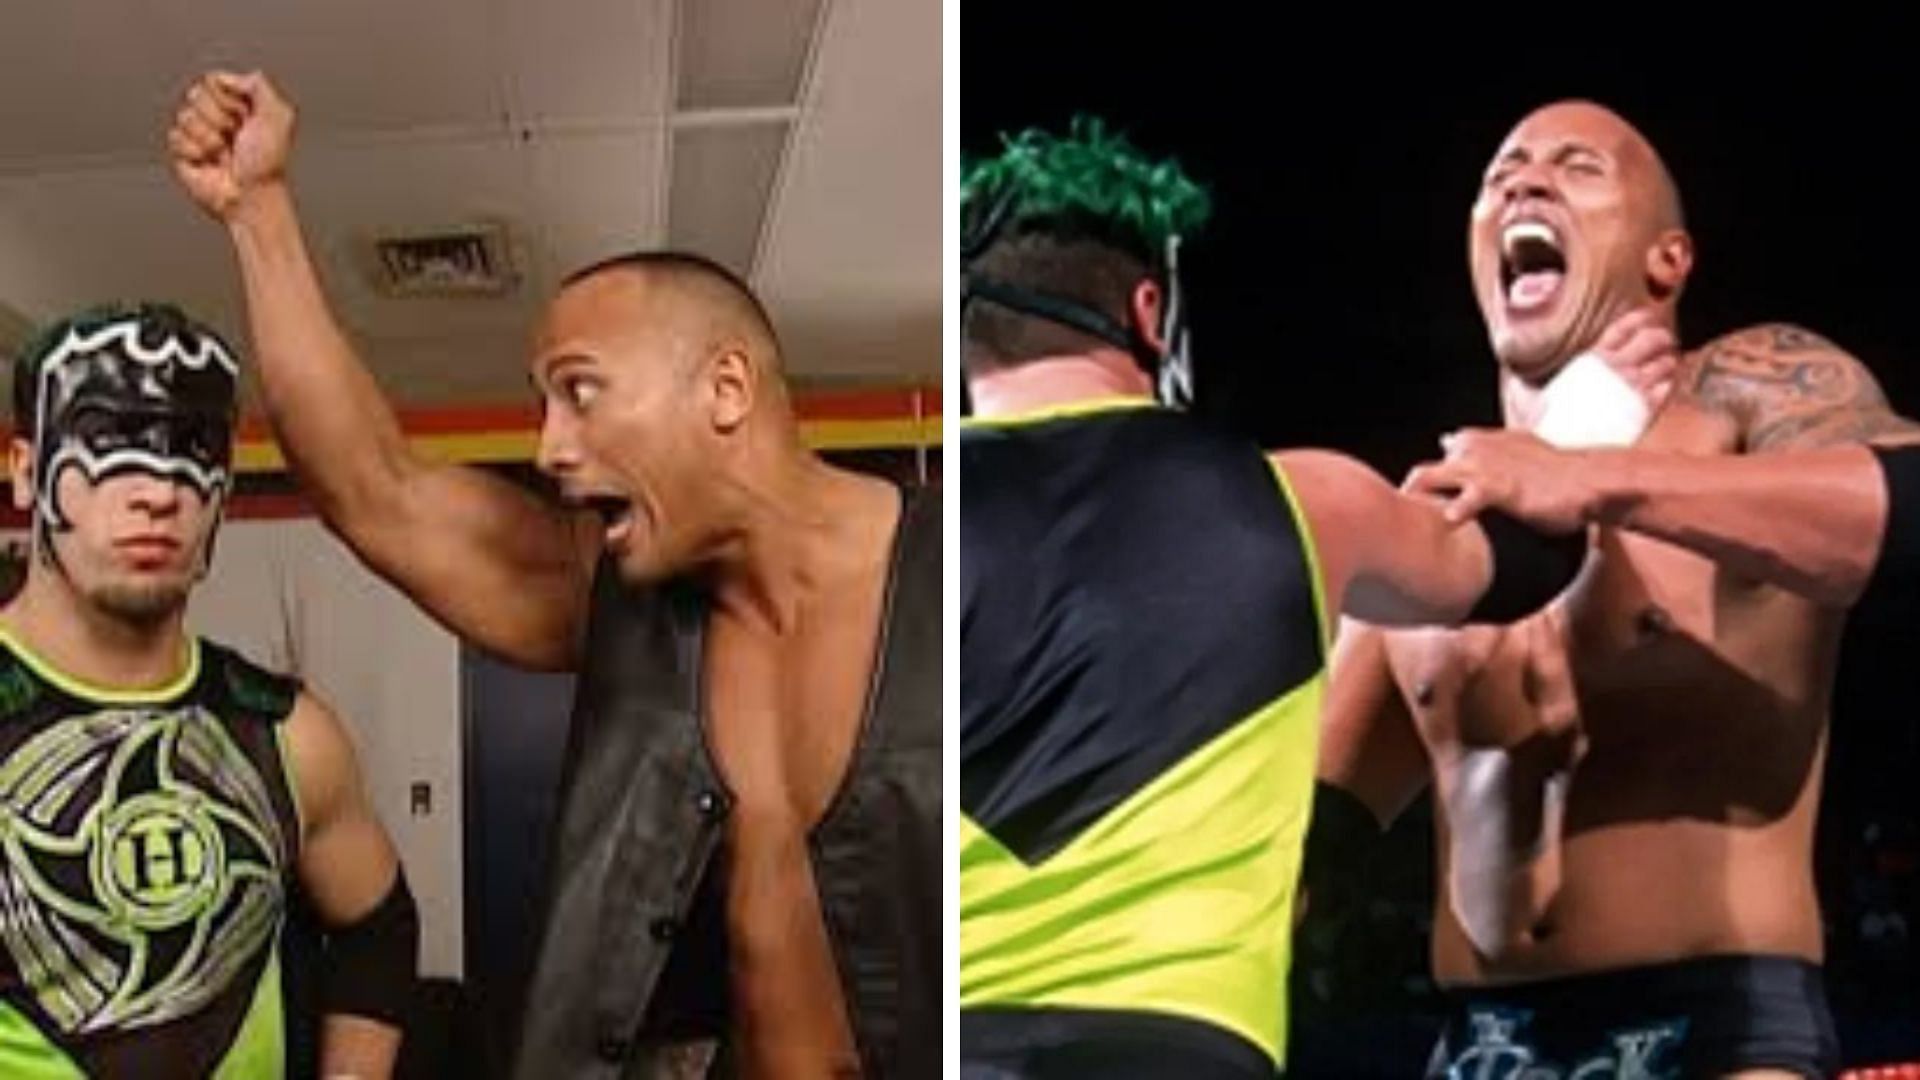 The Hurricane and The Rock had a legendary feud back in the day